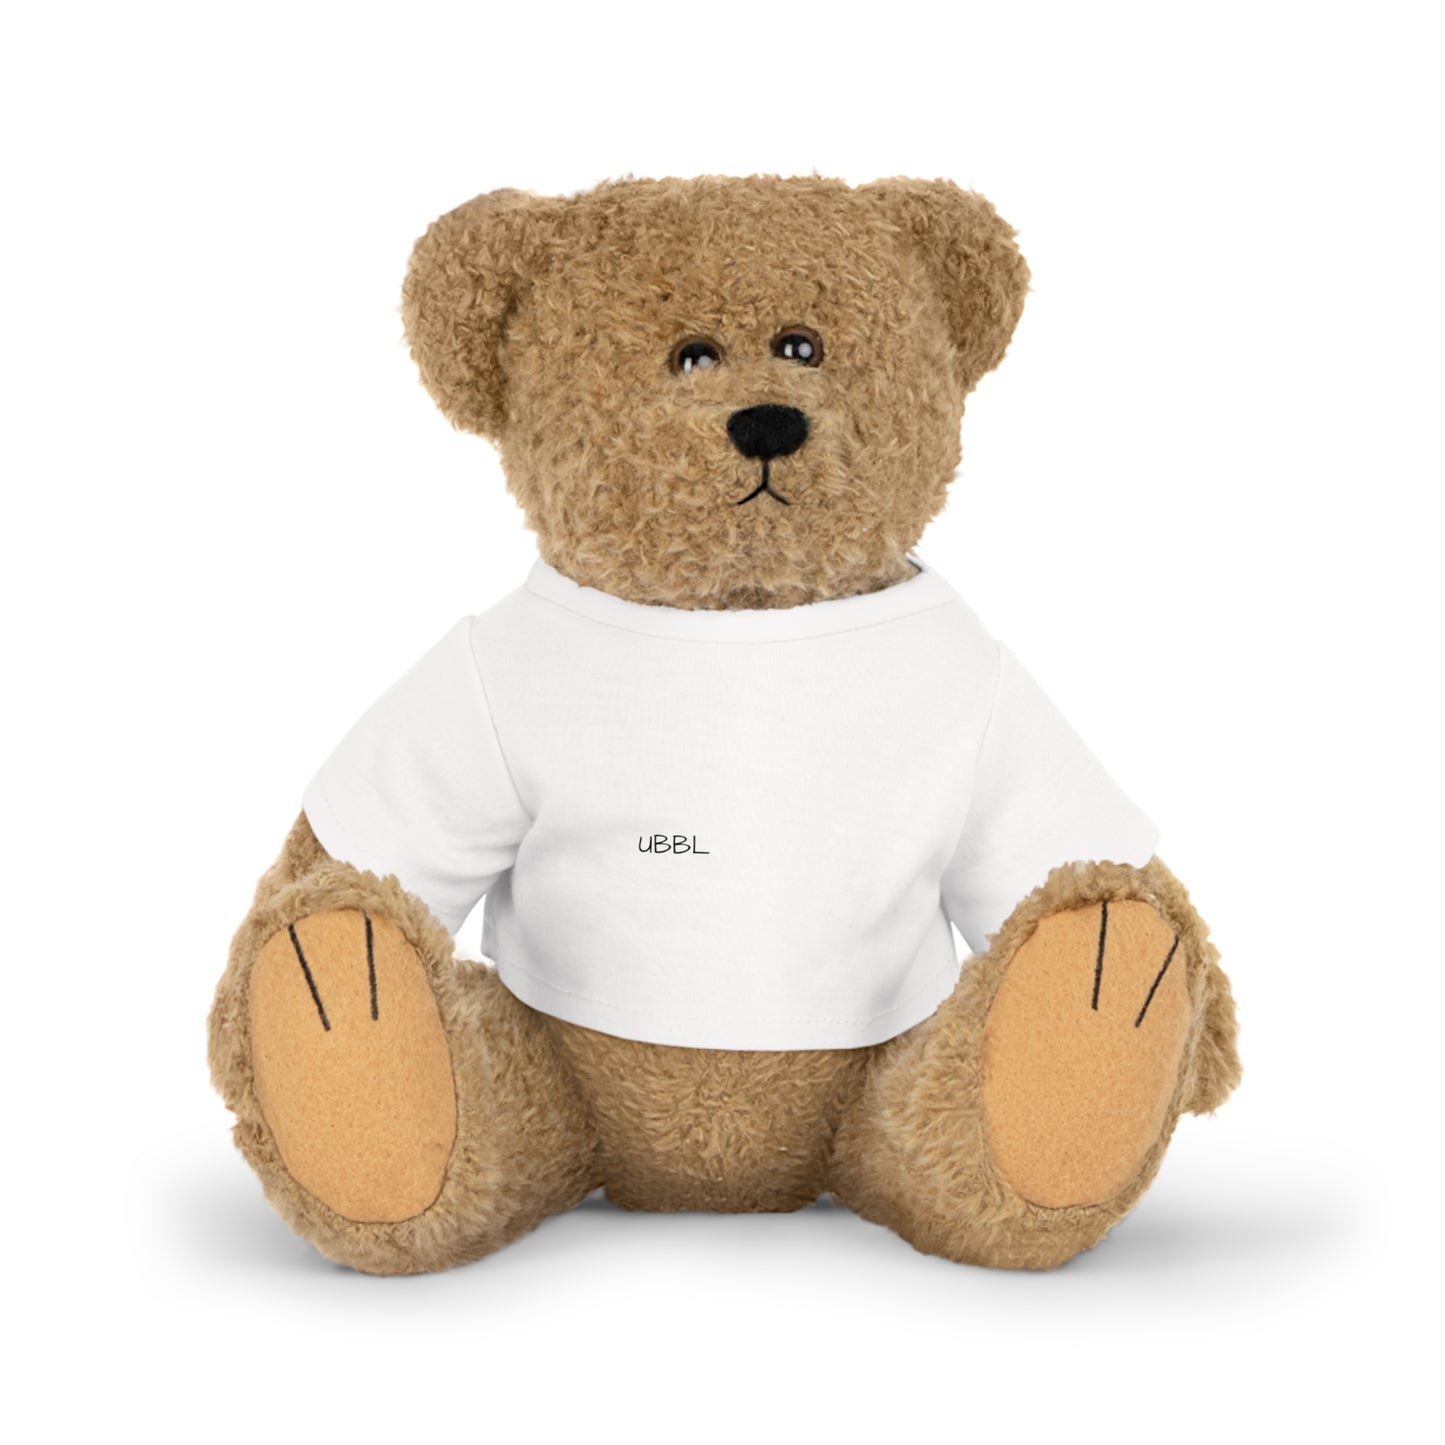 Customizable Plush Toy with T-Shirt